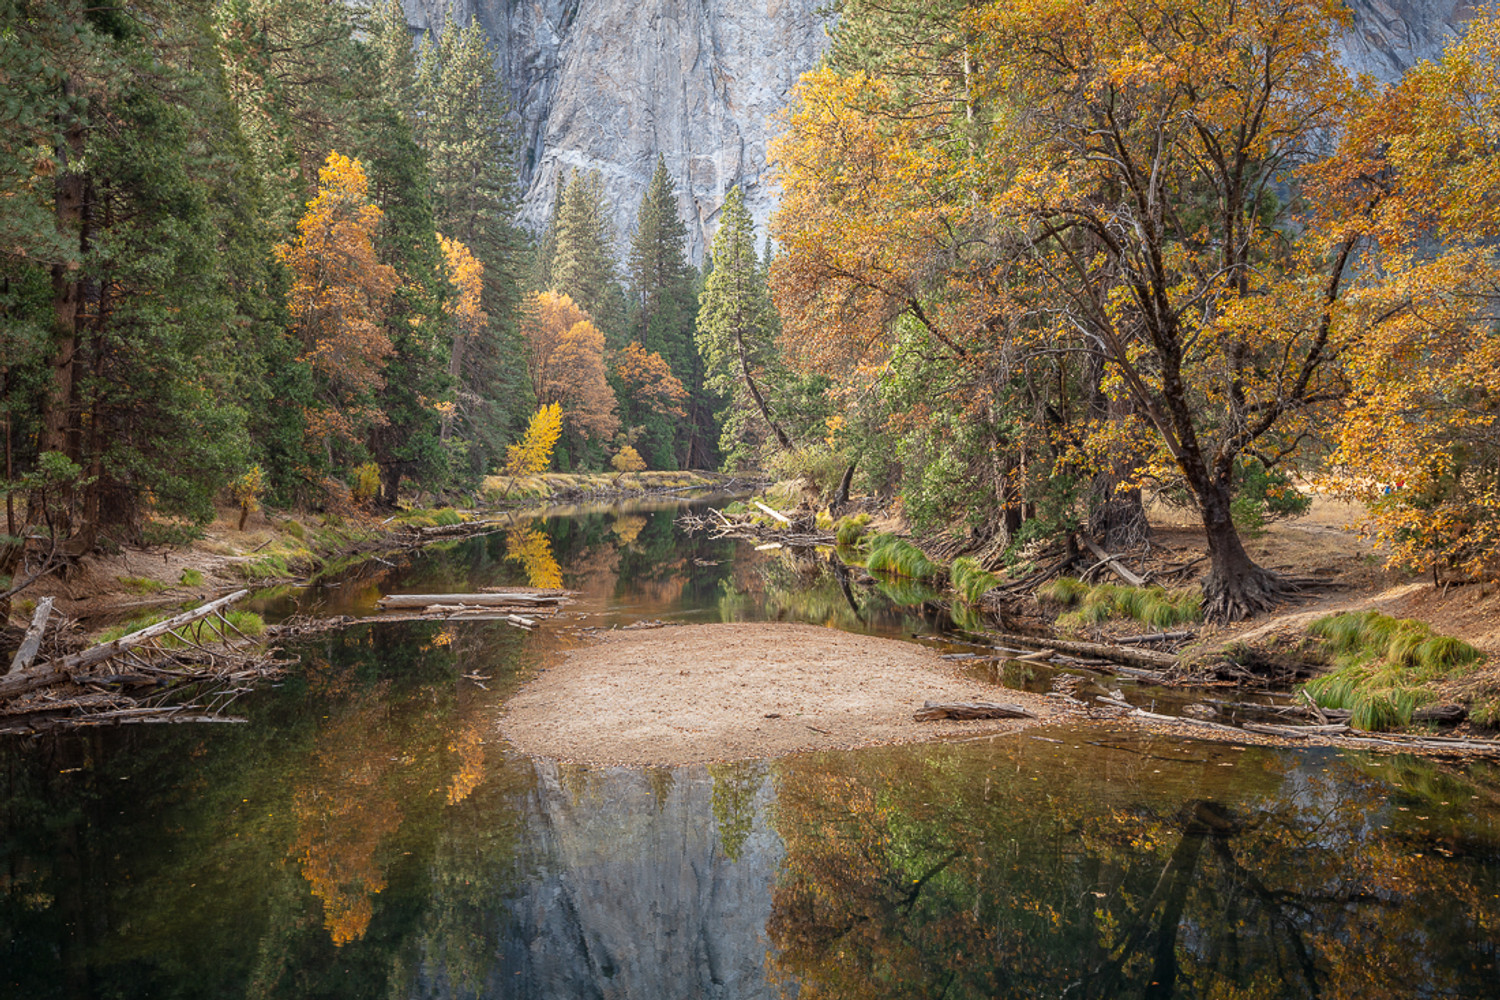 Autumn along the Merced River - Vern Clevenger Photography